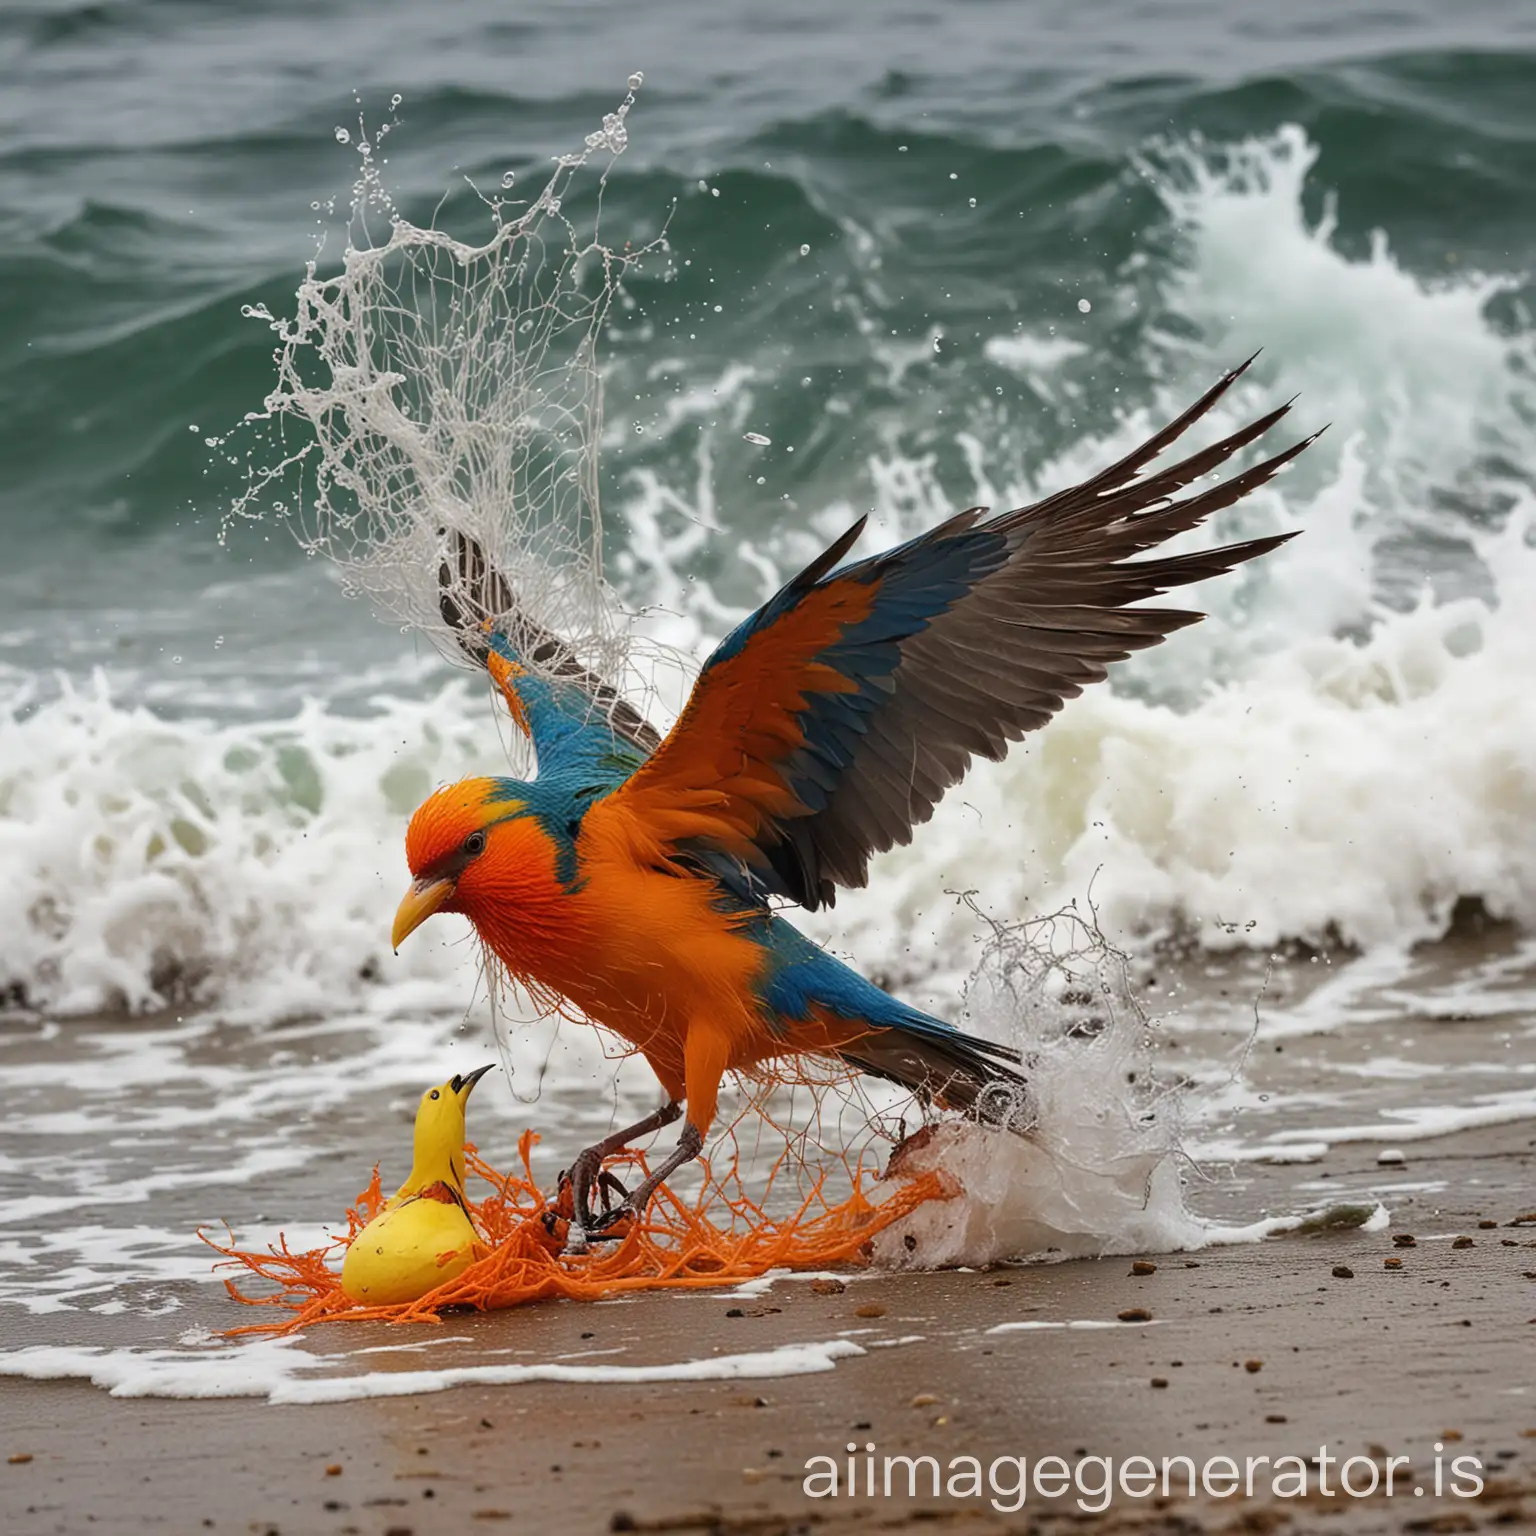 SNAP! The net caught around the colourful  bird's leg. The bird struggled to break free, its cries of pain muffled by the crashing waves. Finally, with a desperate surge of energy, it managed to free itself and surfaced, gasping for air.